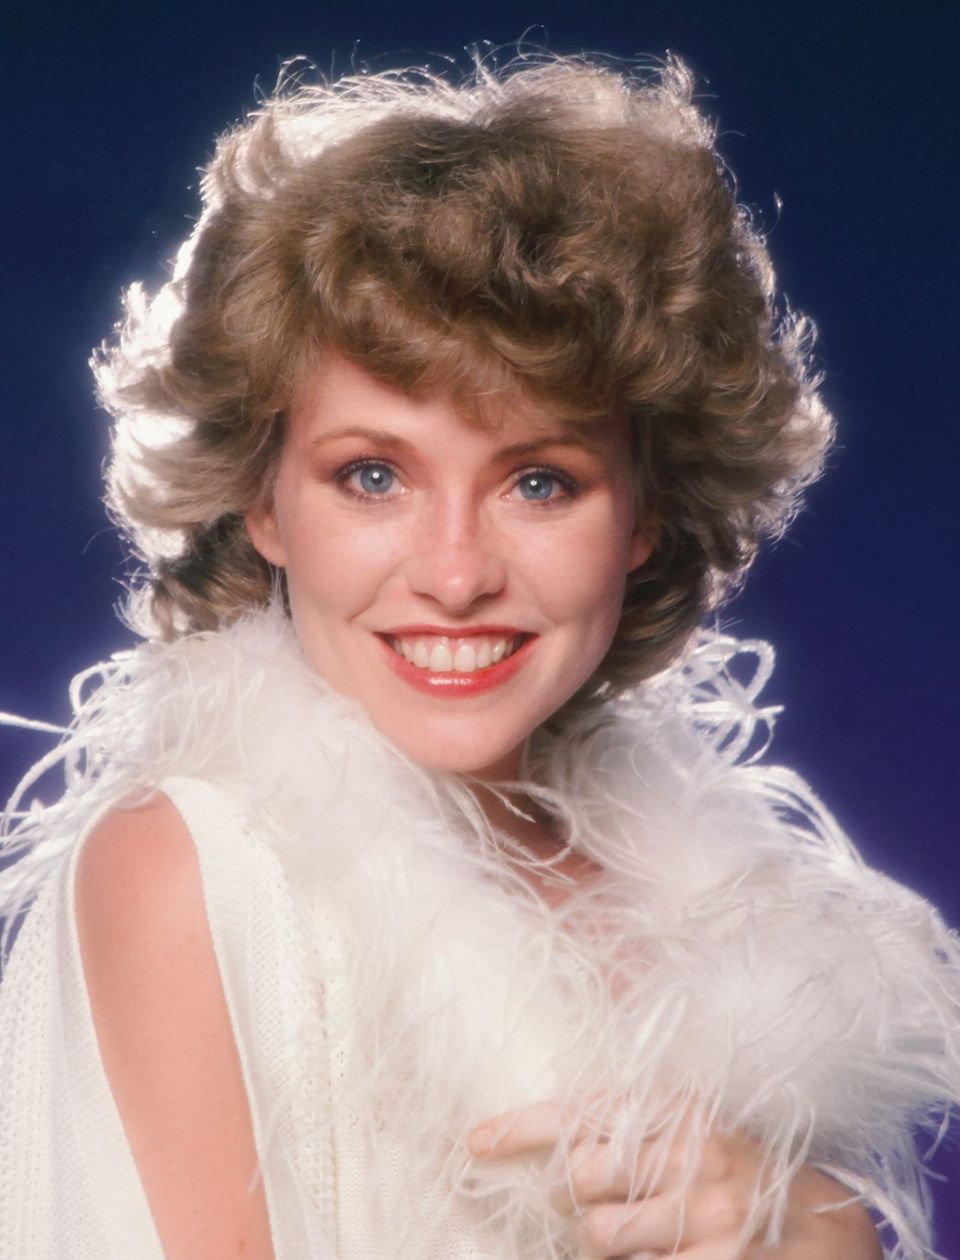 Lauren Tewes poses for a portrait in 1983 in Los Angeles, California. | Source: Getty Imagse